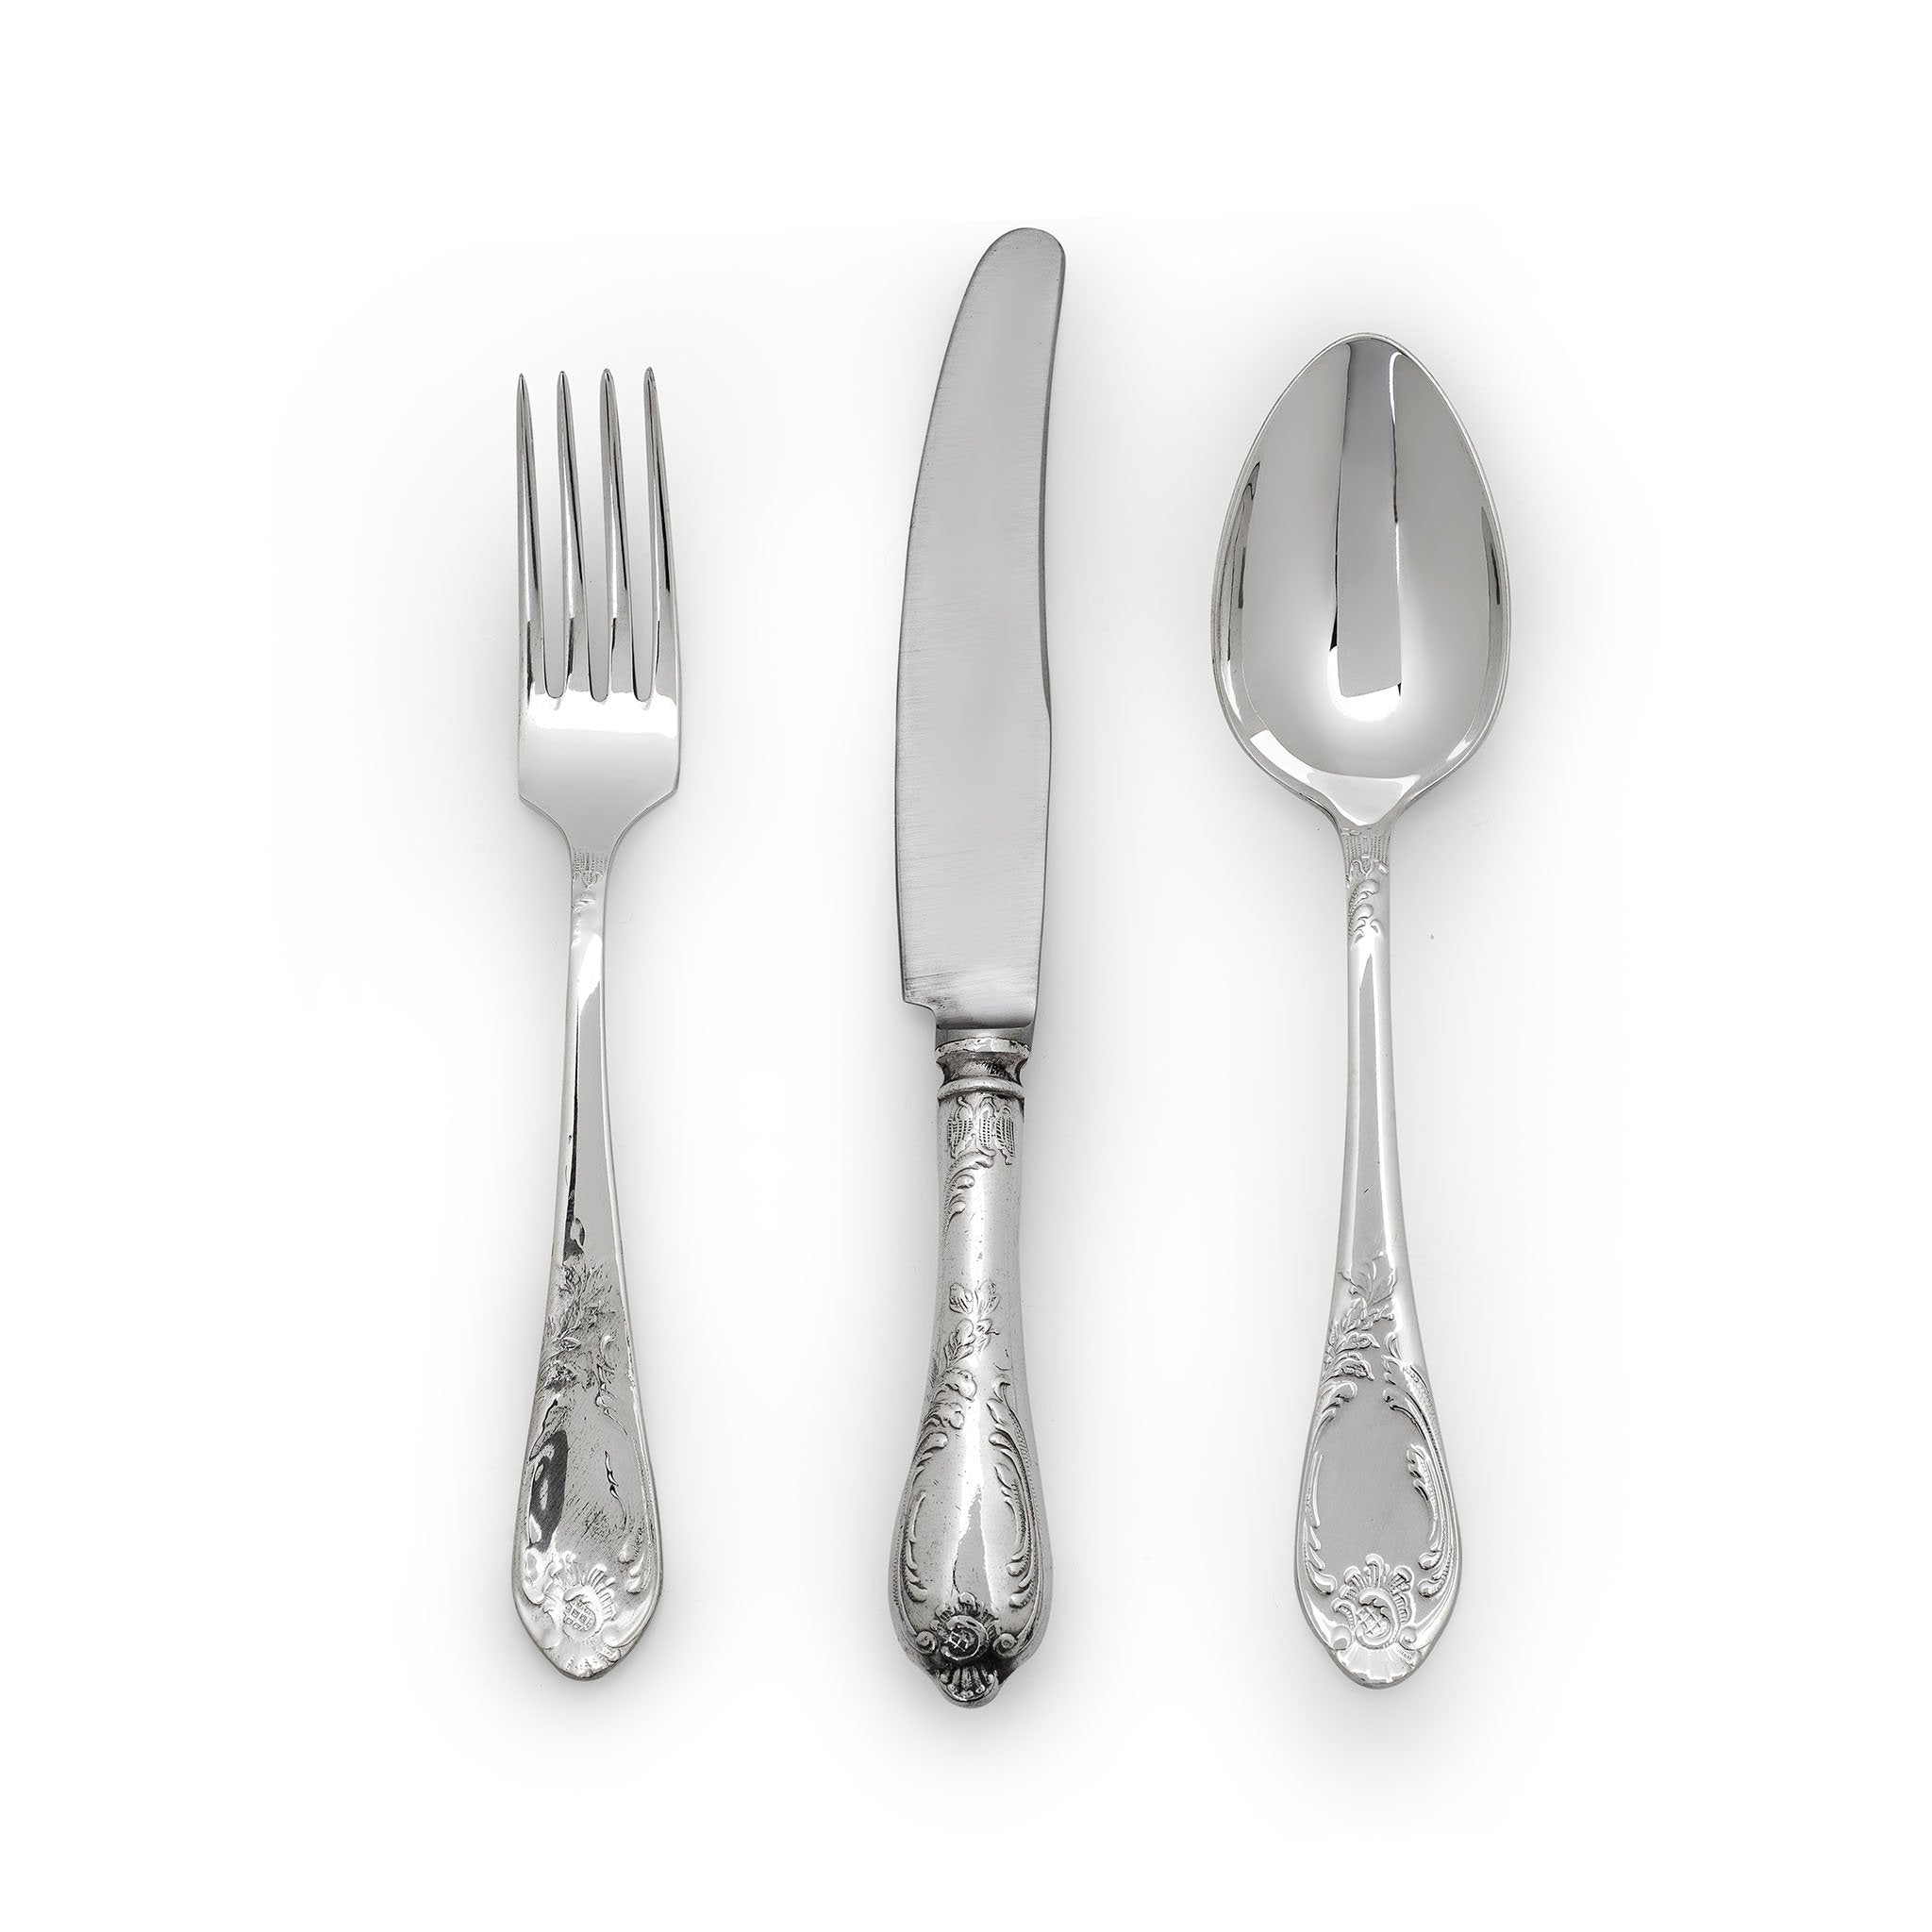 Russian Table Cutlery